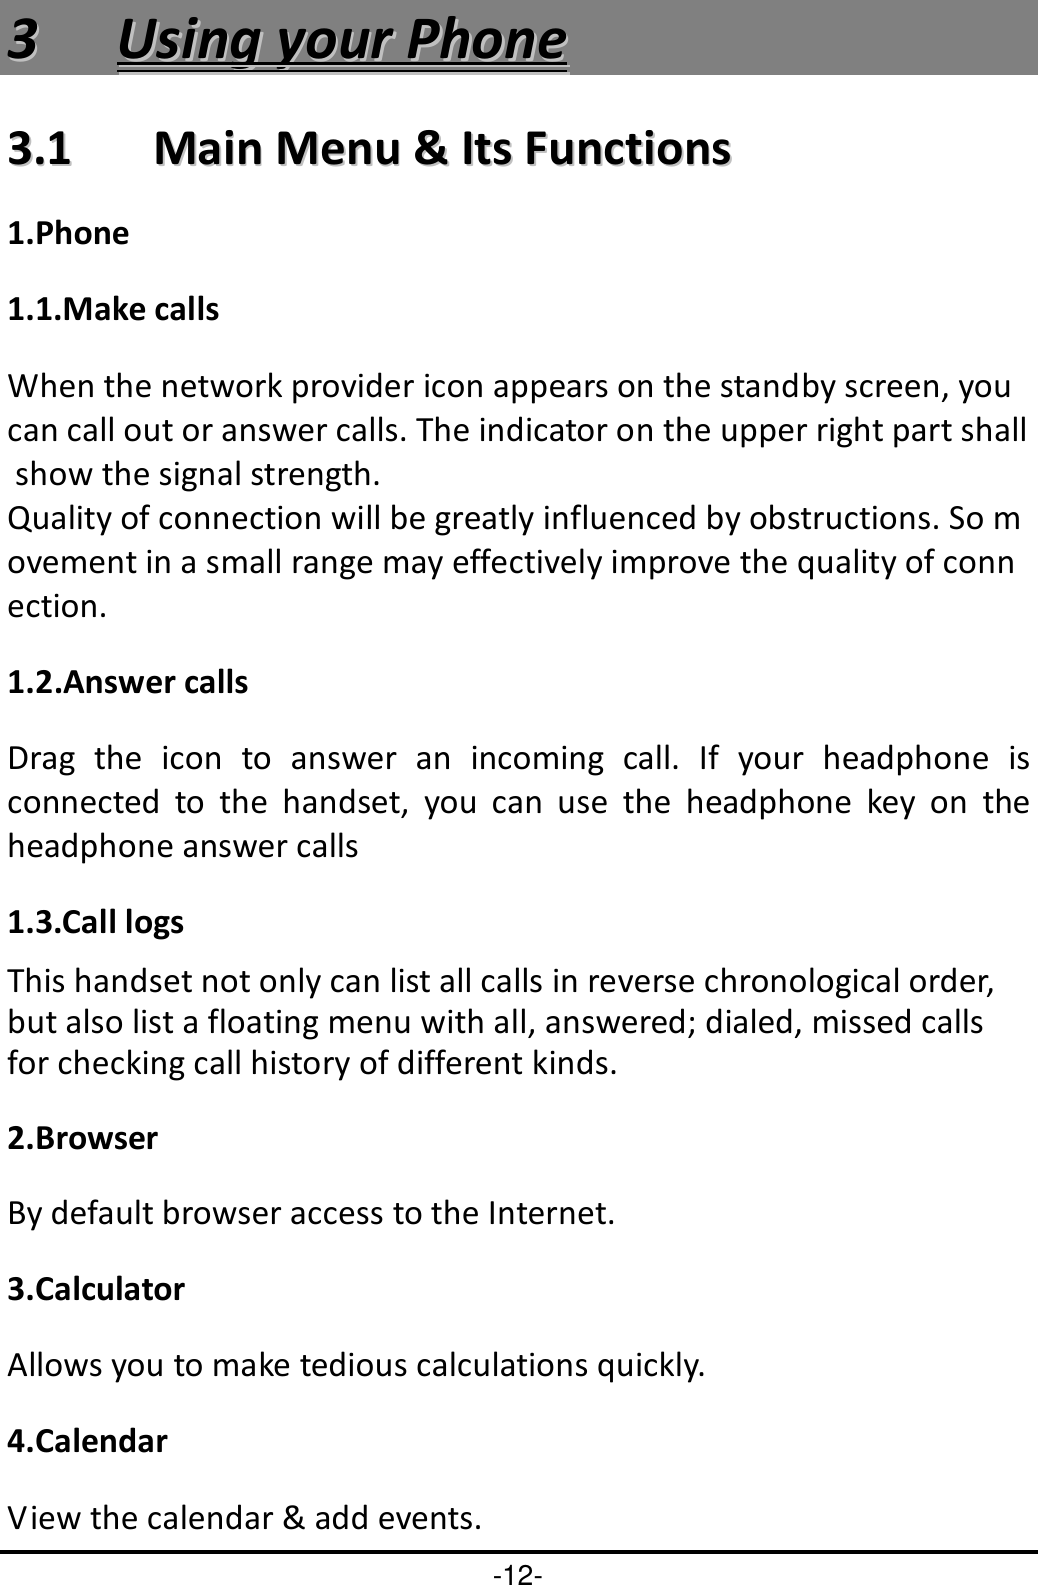 -12- 33  UUssiinngg  yyoouurr  PPhhoonnee  33..11    MMaaiinn  MMeennuu  &amp;&amp;  IIttss  FFuunnccttiioonnss  1.Phone                                                                                                 1.1.Make calls When the network provider icon appears on the standby screen, you can call out or answer calls. The indicator on the upper right part shall show the signal strength. Quality of connection will be greatly influenced by obstructions. So movement in a small range may effectively improve the quality of connection.   1.2.Answer calls Drag  the  icon  to  answer  an  incoming  call.  If  your  headphone  is connected  to  the  handset,  you  can  use  the  headphone  key  on  the headphone answer calls 1.3.Call logs This handset not only can list all calls in reverse chronological order, but also list a floating menu with all, answered; dialed, missed calls for checking call history of different kinds. 2.Browser By default browser access to the Internet.   3.Calculator Allows you to make tedious calculations quickly. 4.Calendar View the calendar &amp; add events. 